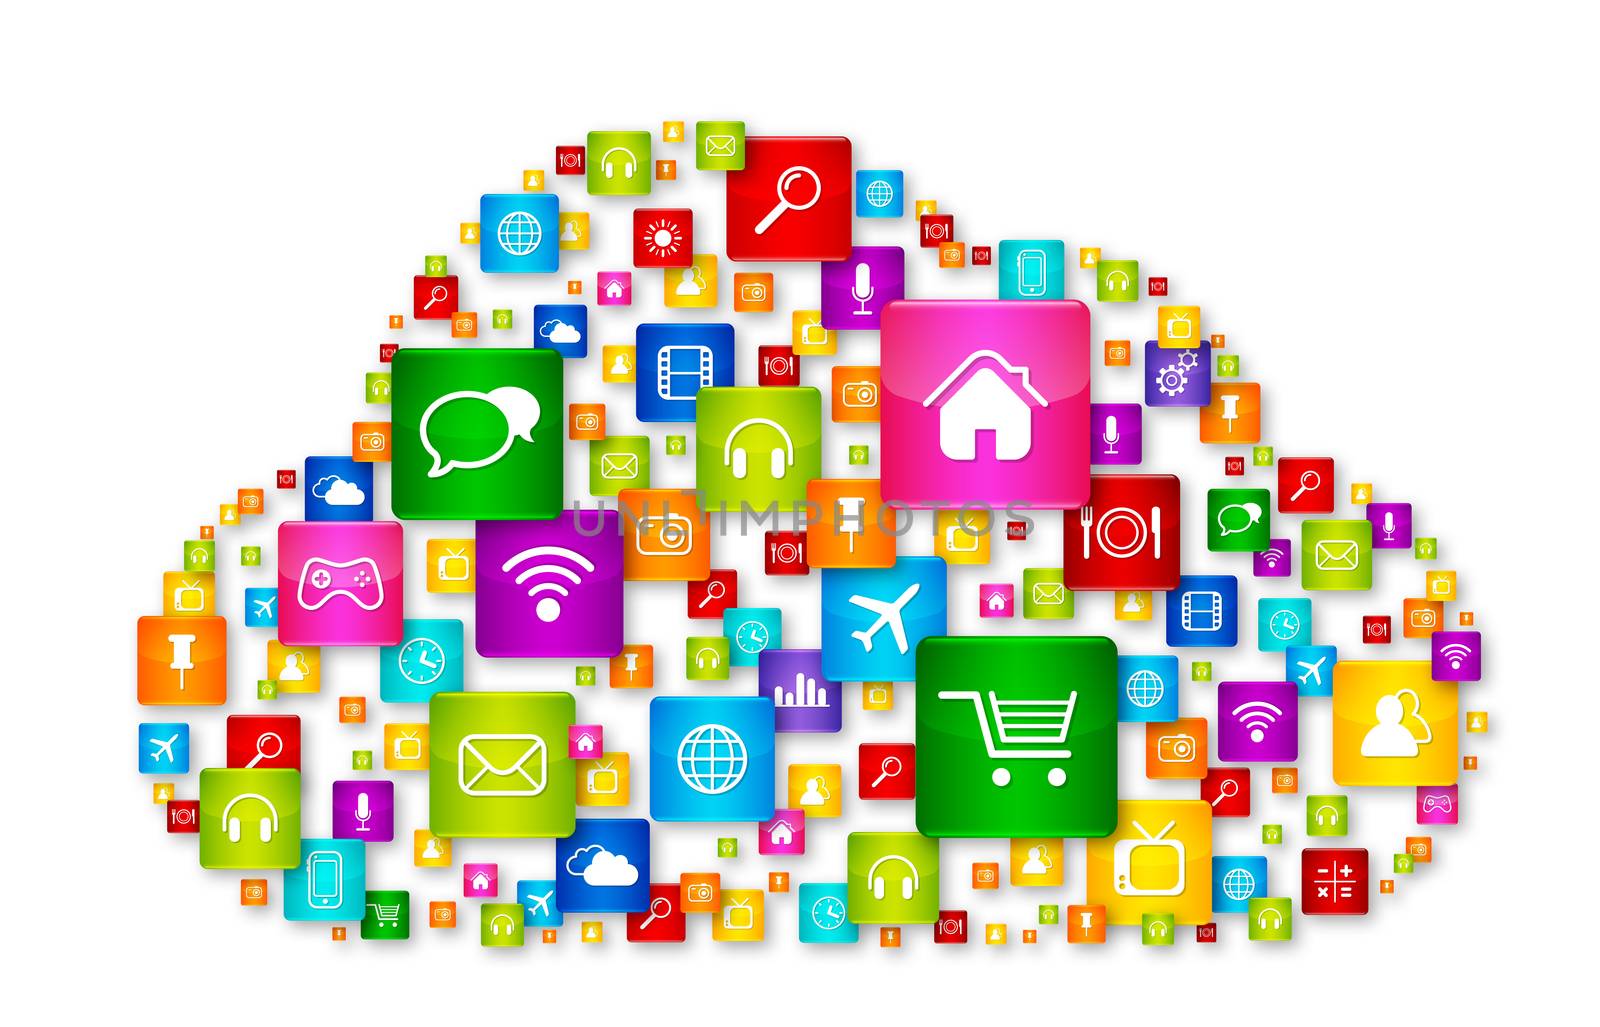 Cloud Computing concept. apps icons set isolated on white